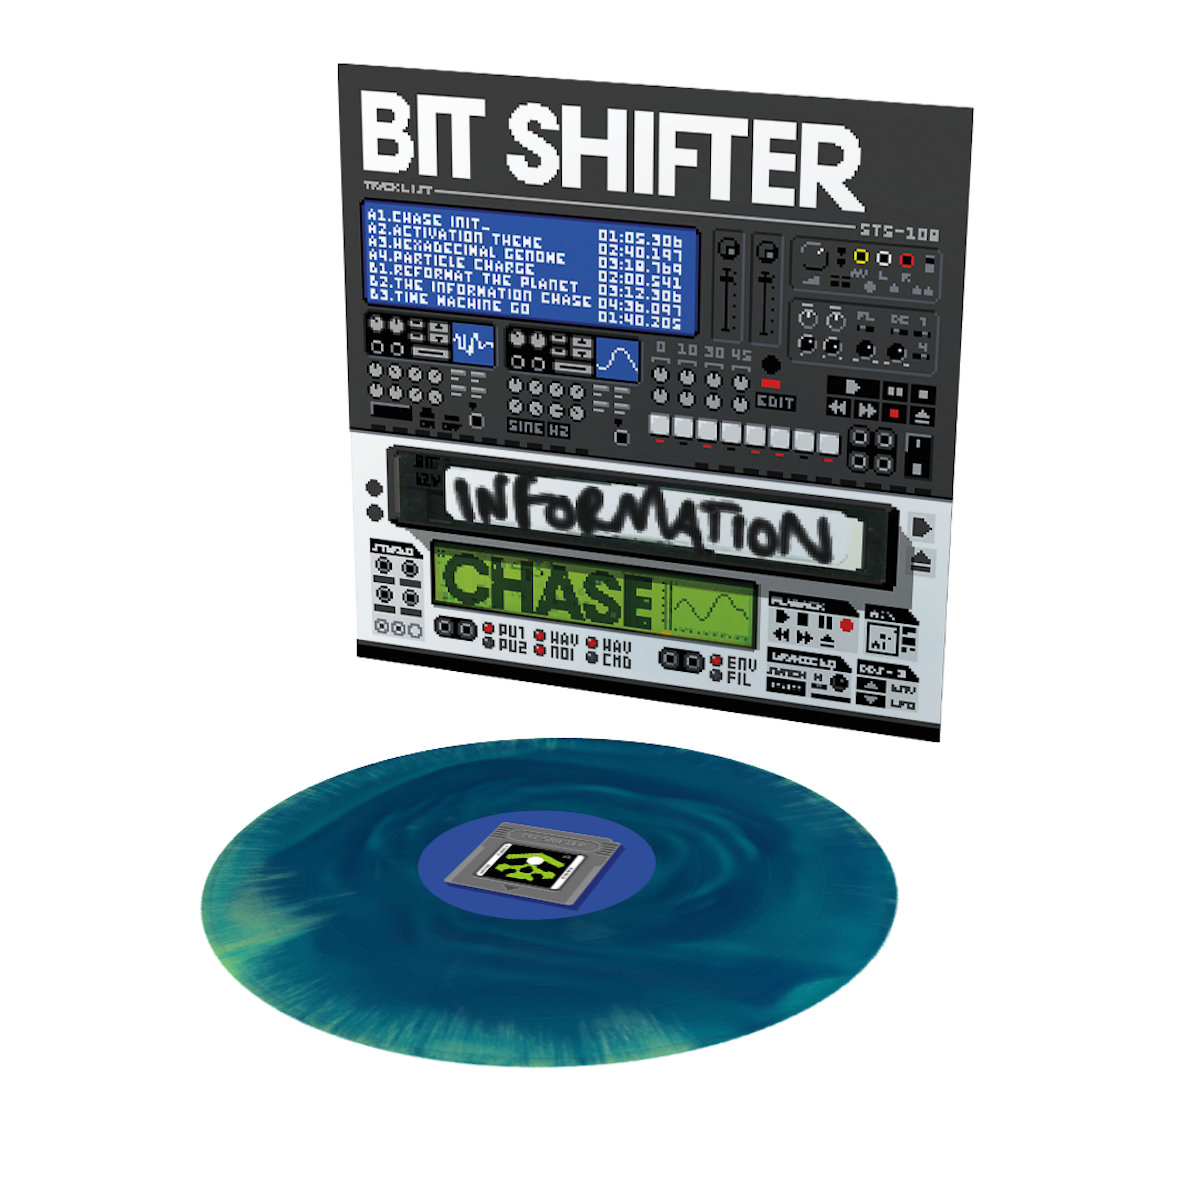 Product photo of the 2nd pressing of the Information Chase EP, showing the outer sleeve, as well as the record itself, pressed on blue/green swirl vinyl.